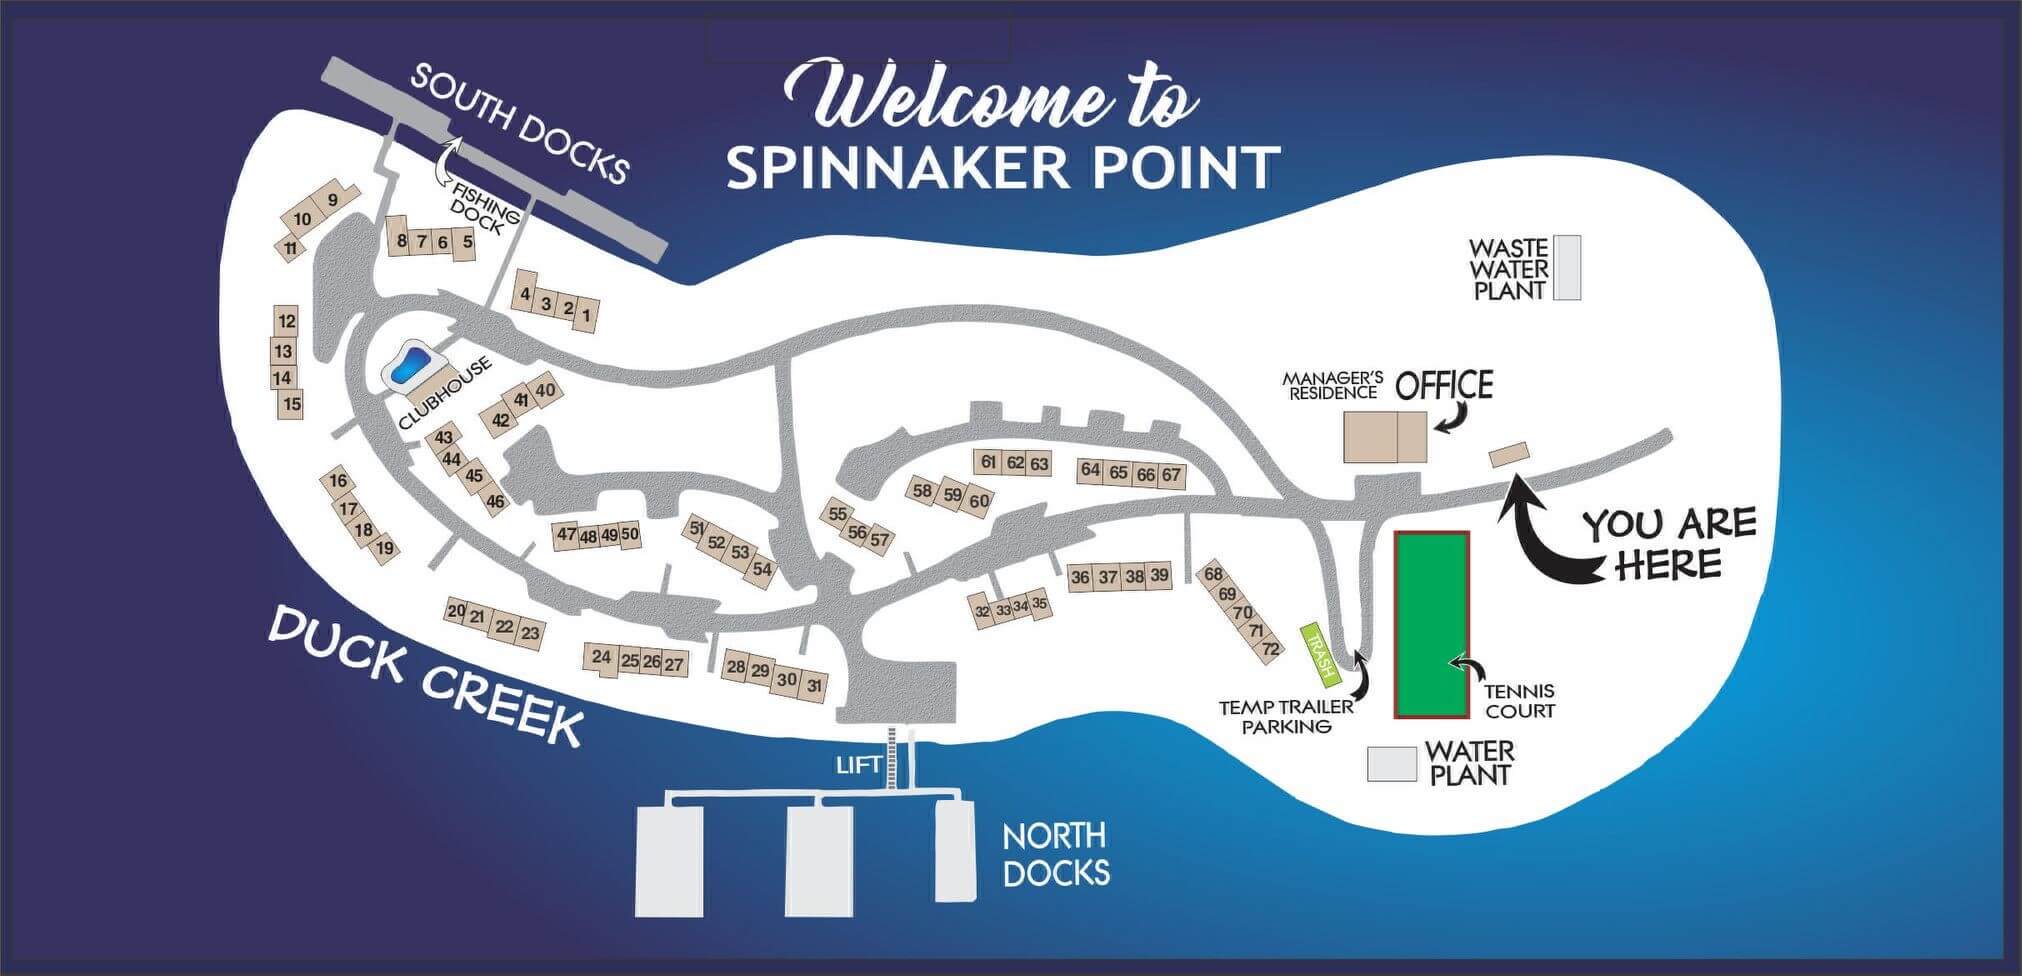 The welcome sign here at Spinnaker Point